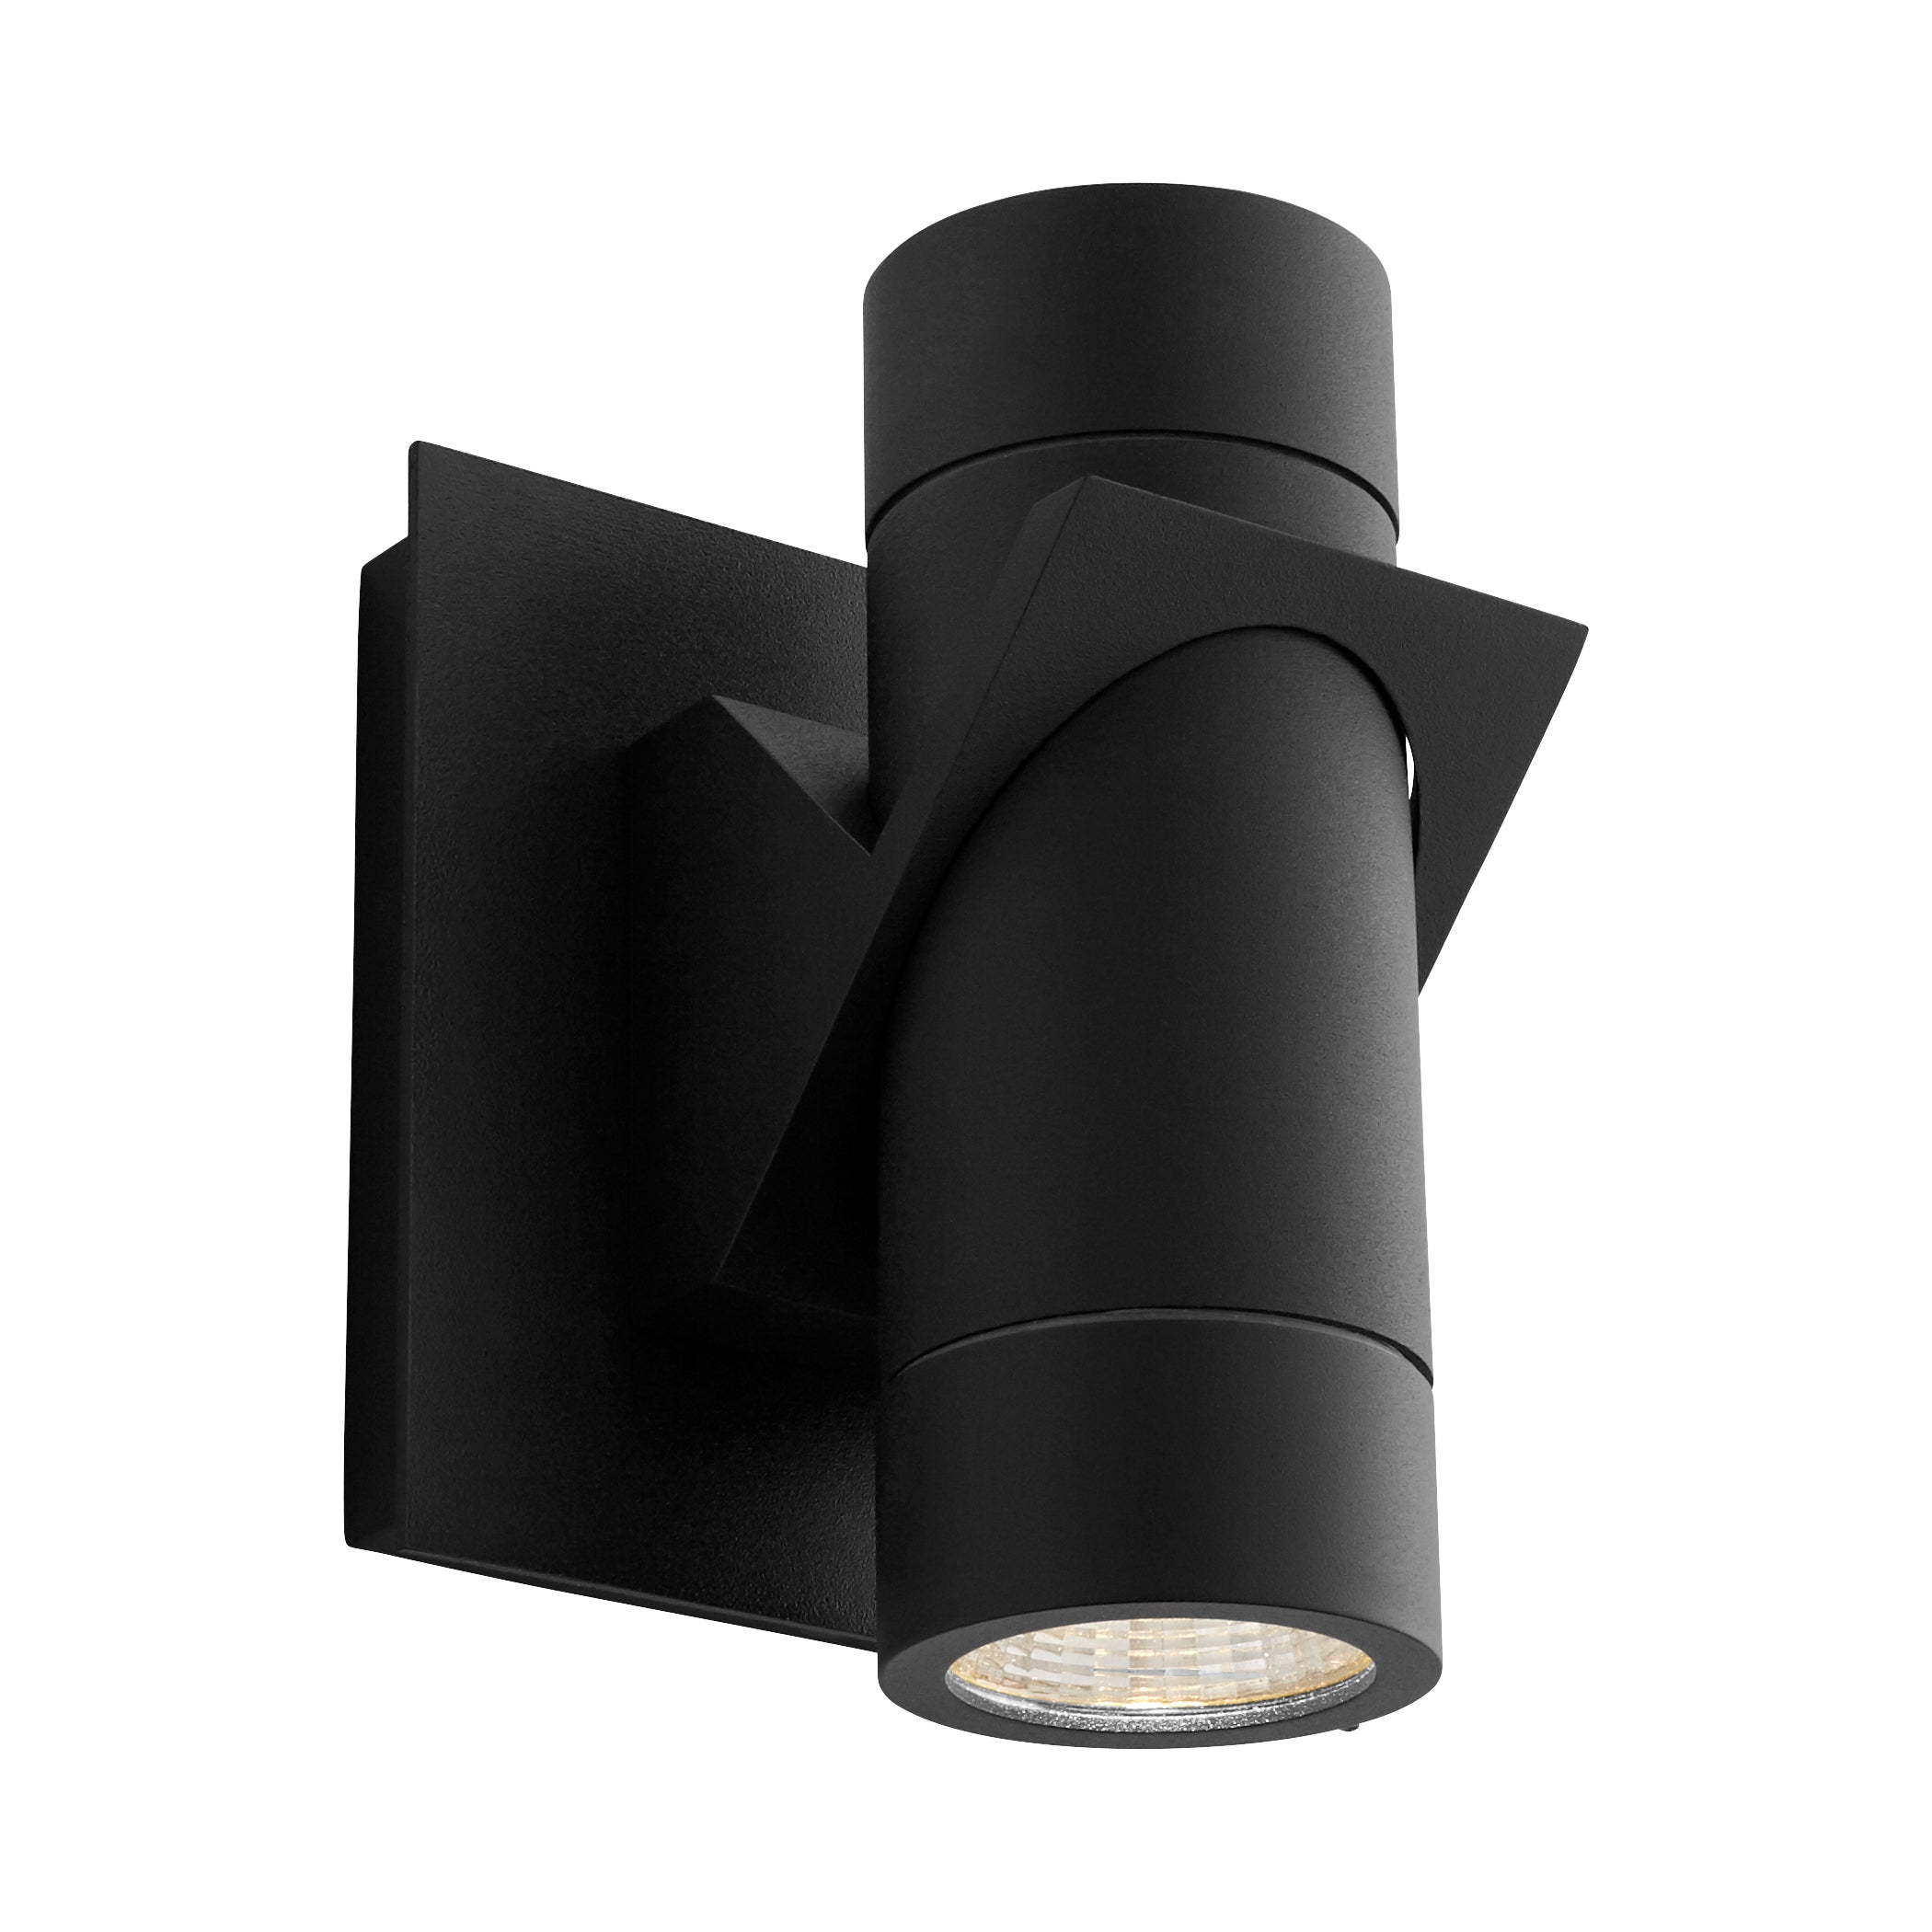 Oxygen Razzo 3-746-15 Outdoor Cylinder Wall Sconce Light - Black